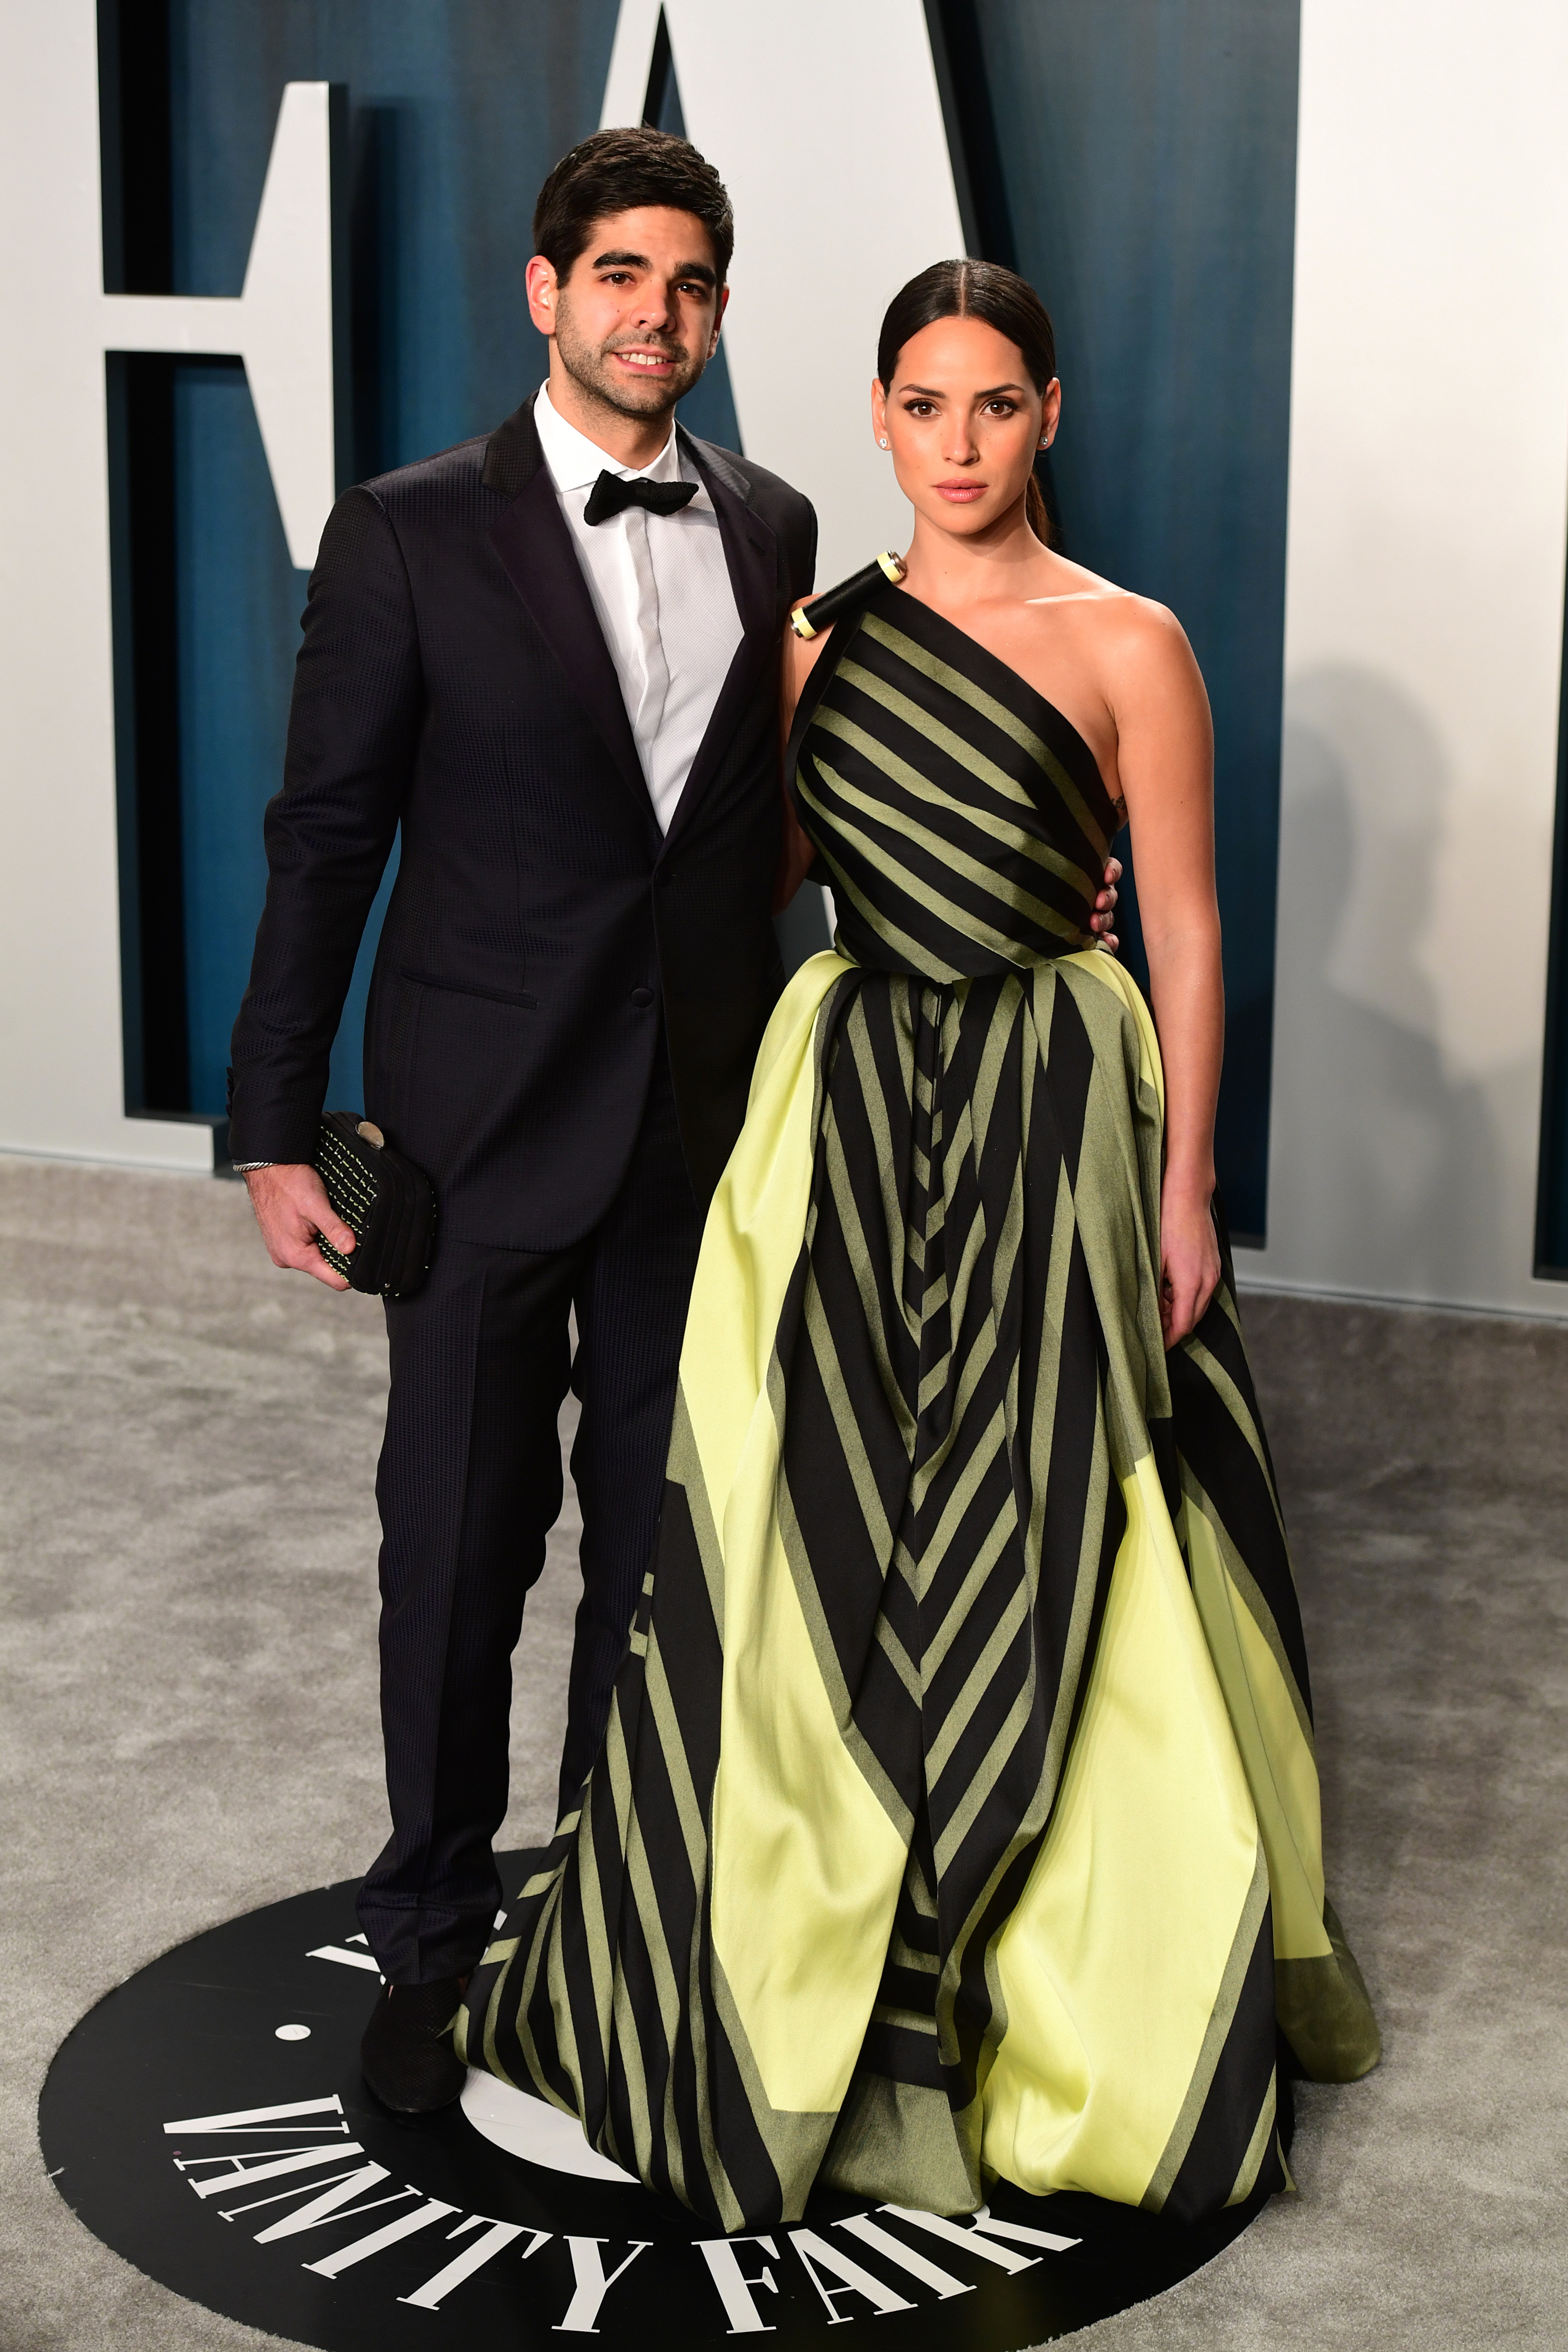 Edgardo Canales and Adria Arjona at the Vanity Fair Oscar Party on February 9, 2020, in Beverly Hills, Los Angeles, California. | Source: Getty Images